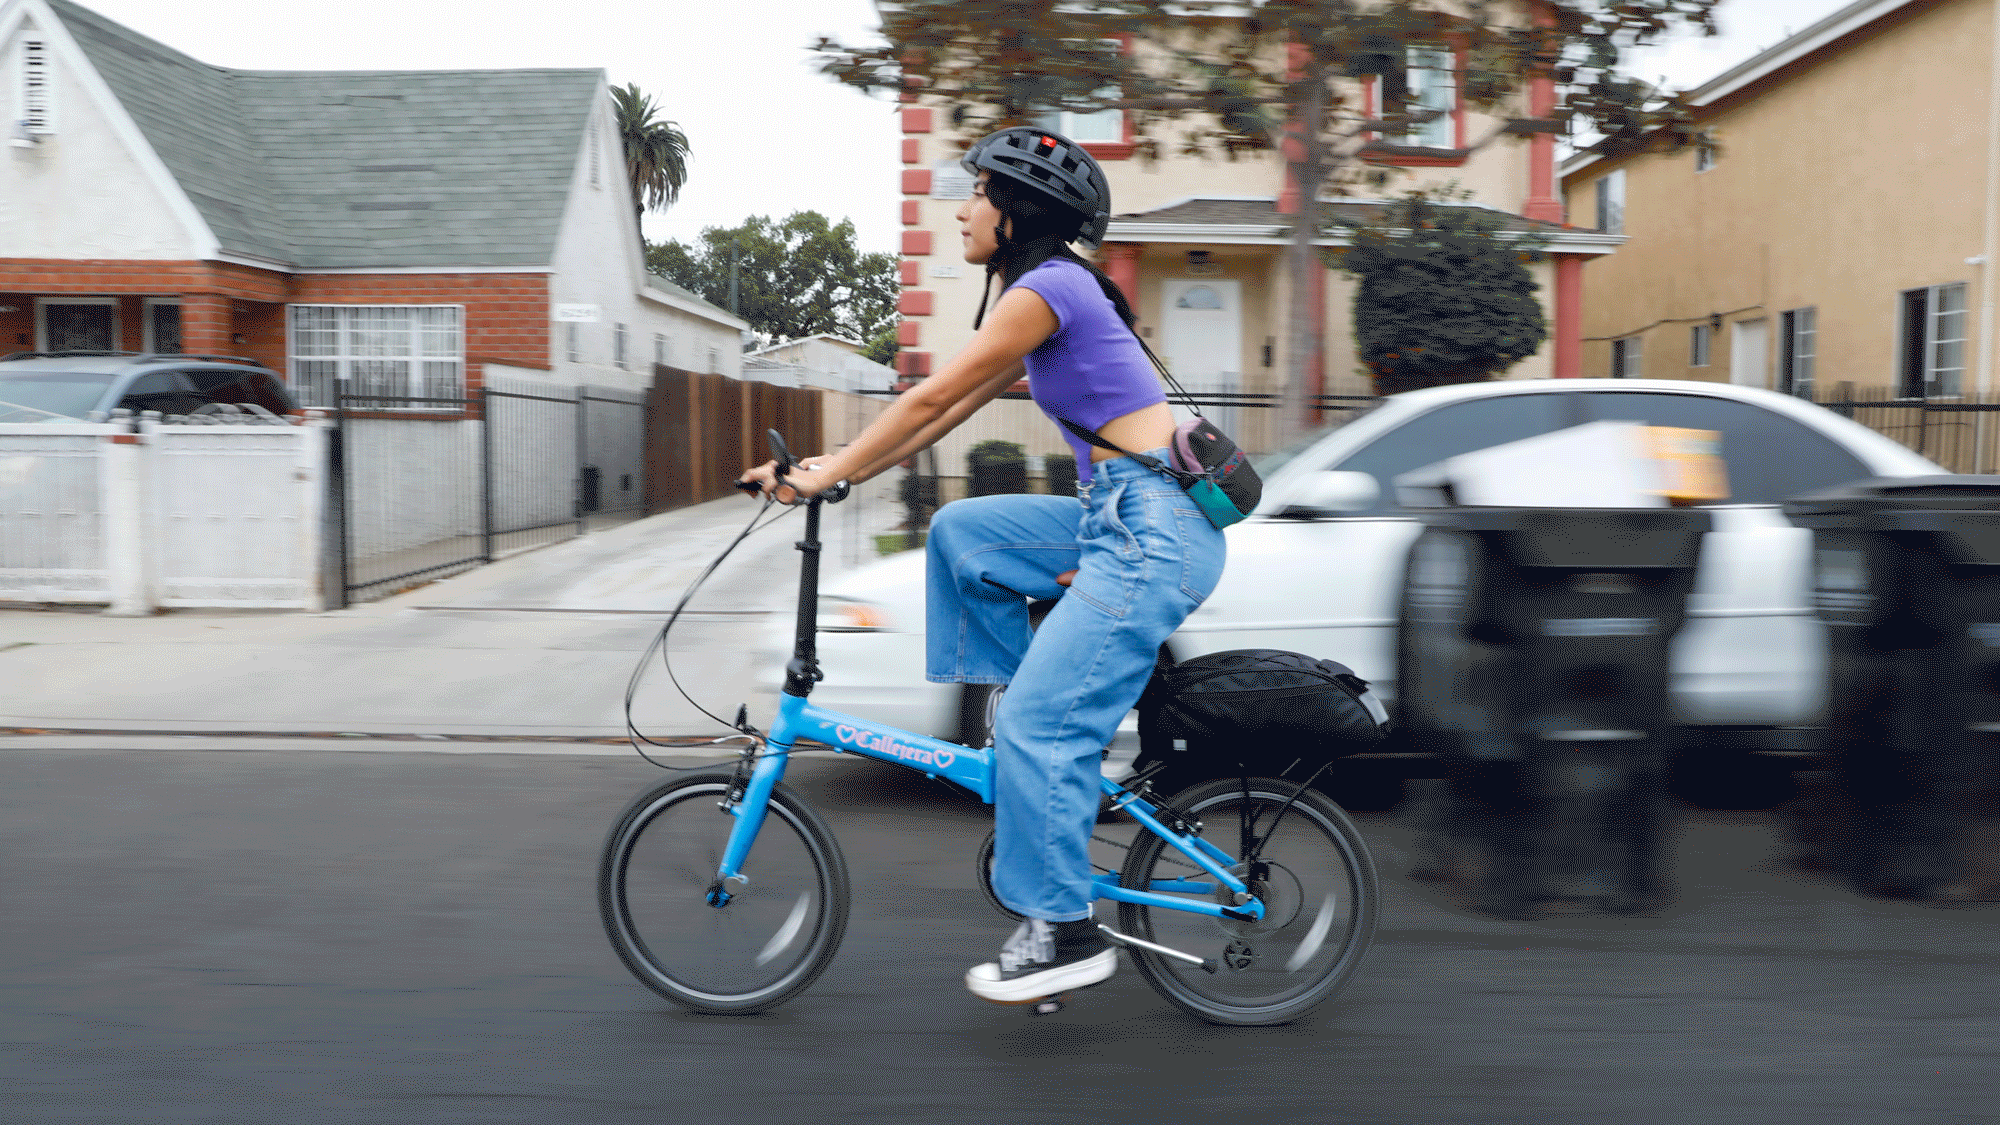 A looping boomerang GIF of Michelle Moro riding her blue bicycle in a neighborhood.